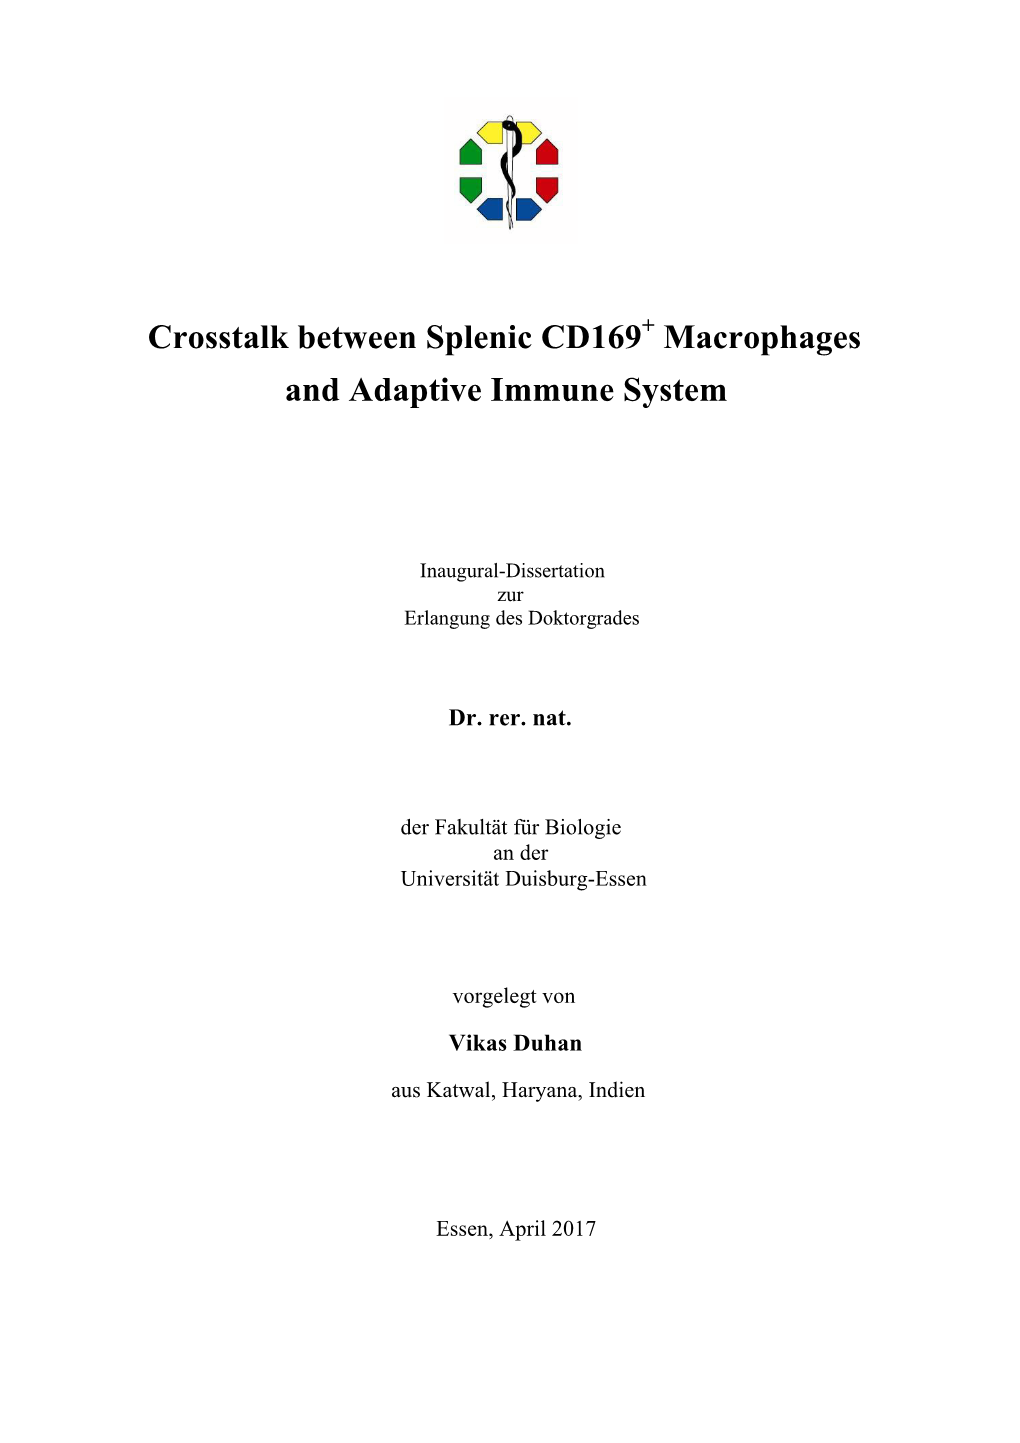 Macrophages and Adaptive Immune System